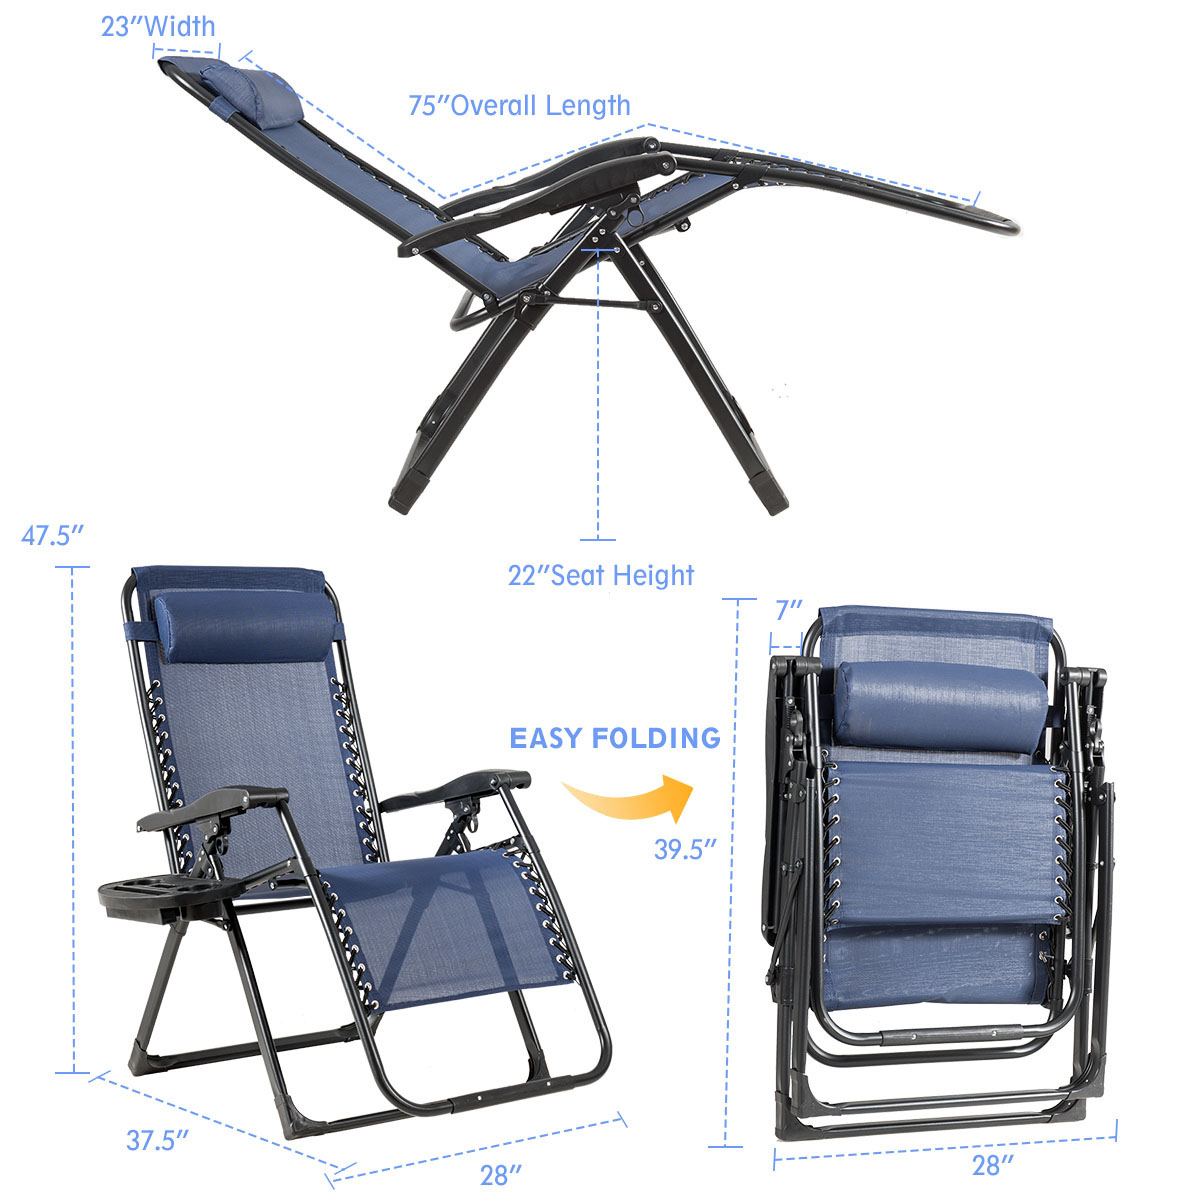 Costway Zero Gravity Chair Oversize Lounge Chair Patio Heavy Duty Folding Recliner Blue - image 3 of 8